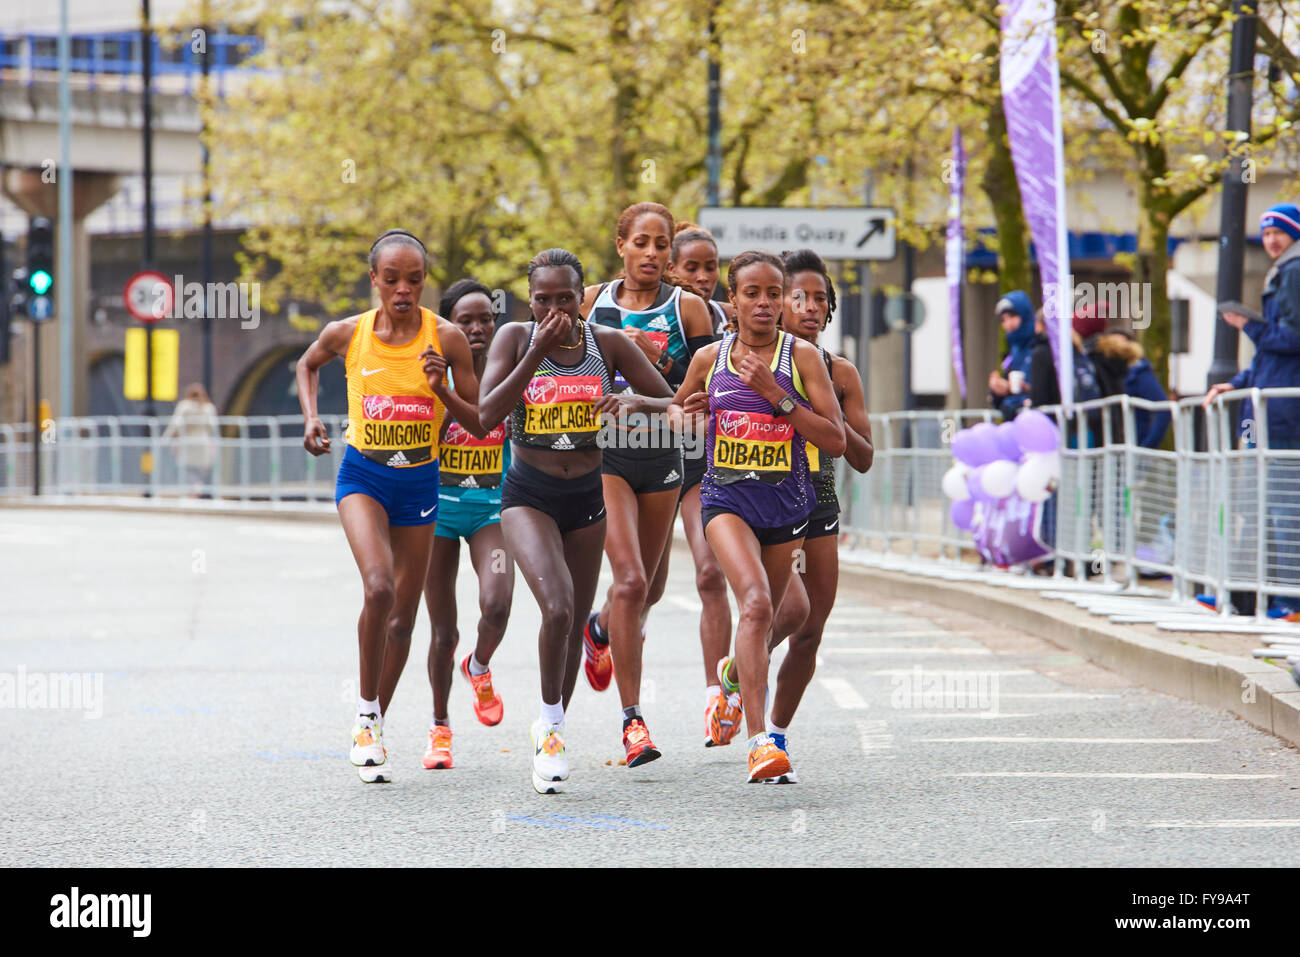 LONDON, UK - APRIL 24, 2016: Elite Women's Race leaders group competing for first position on the Virgin Money London Marathon 2016. Shot on the 20 mile stretch, on West India Dock Road. Stock Photo